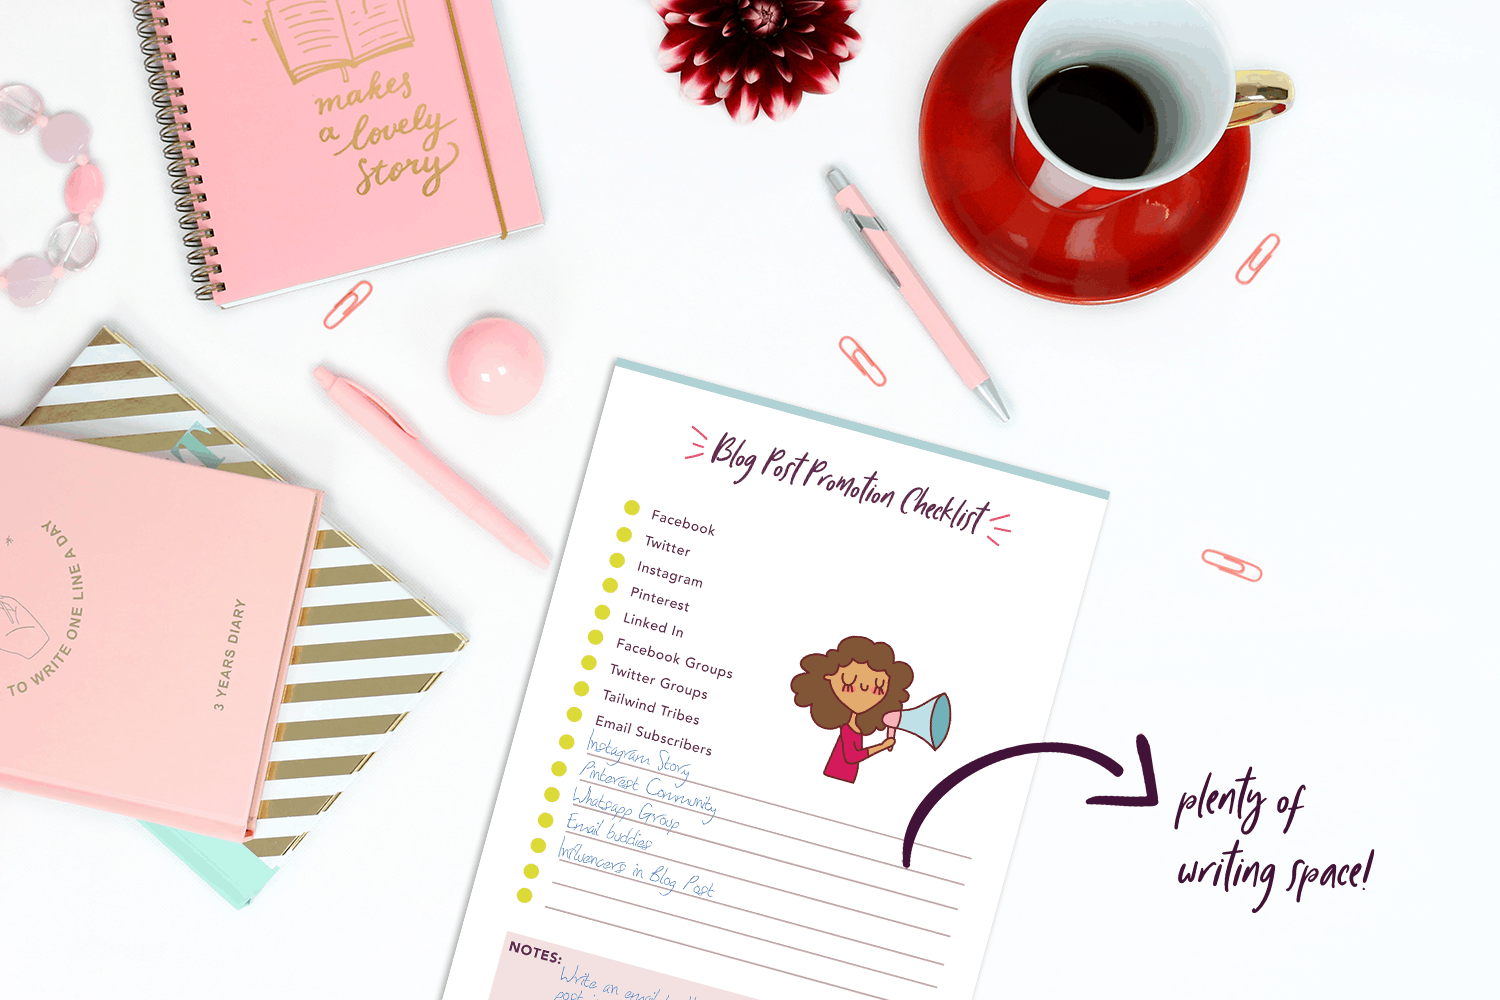 This blog planner is super cute and has tons of space to write everything you want to in order to grow your blog.